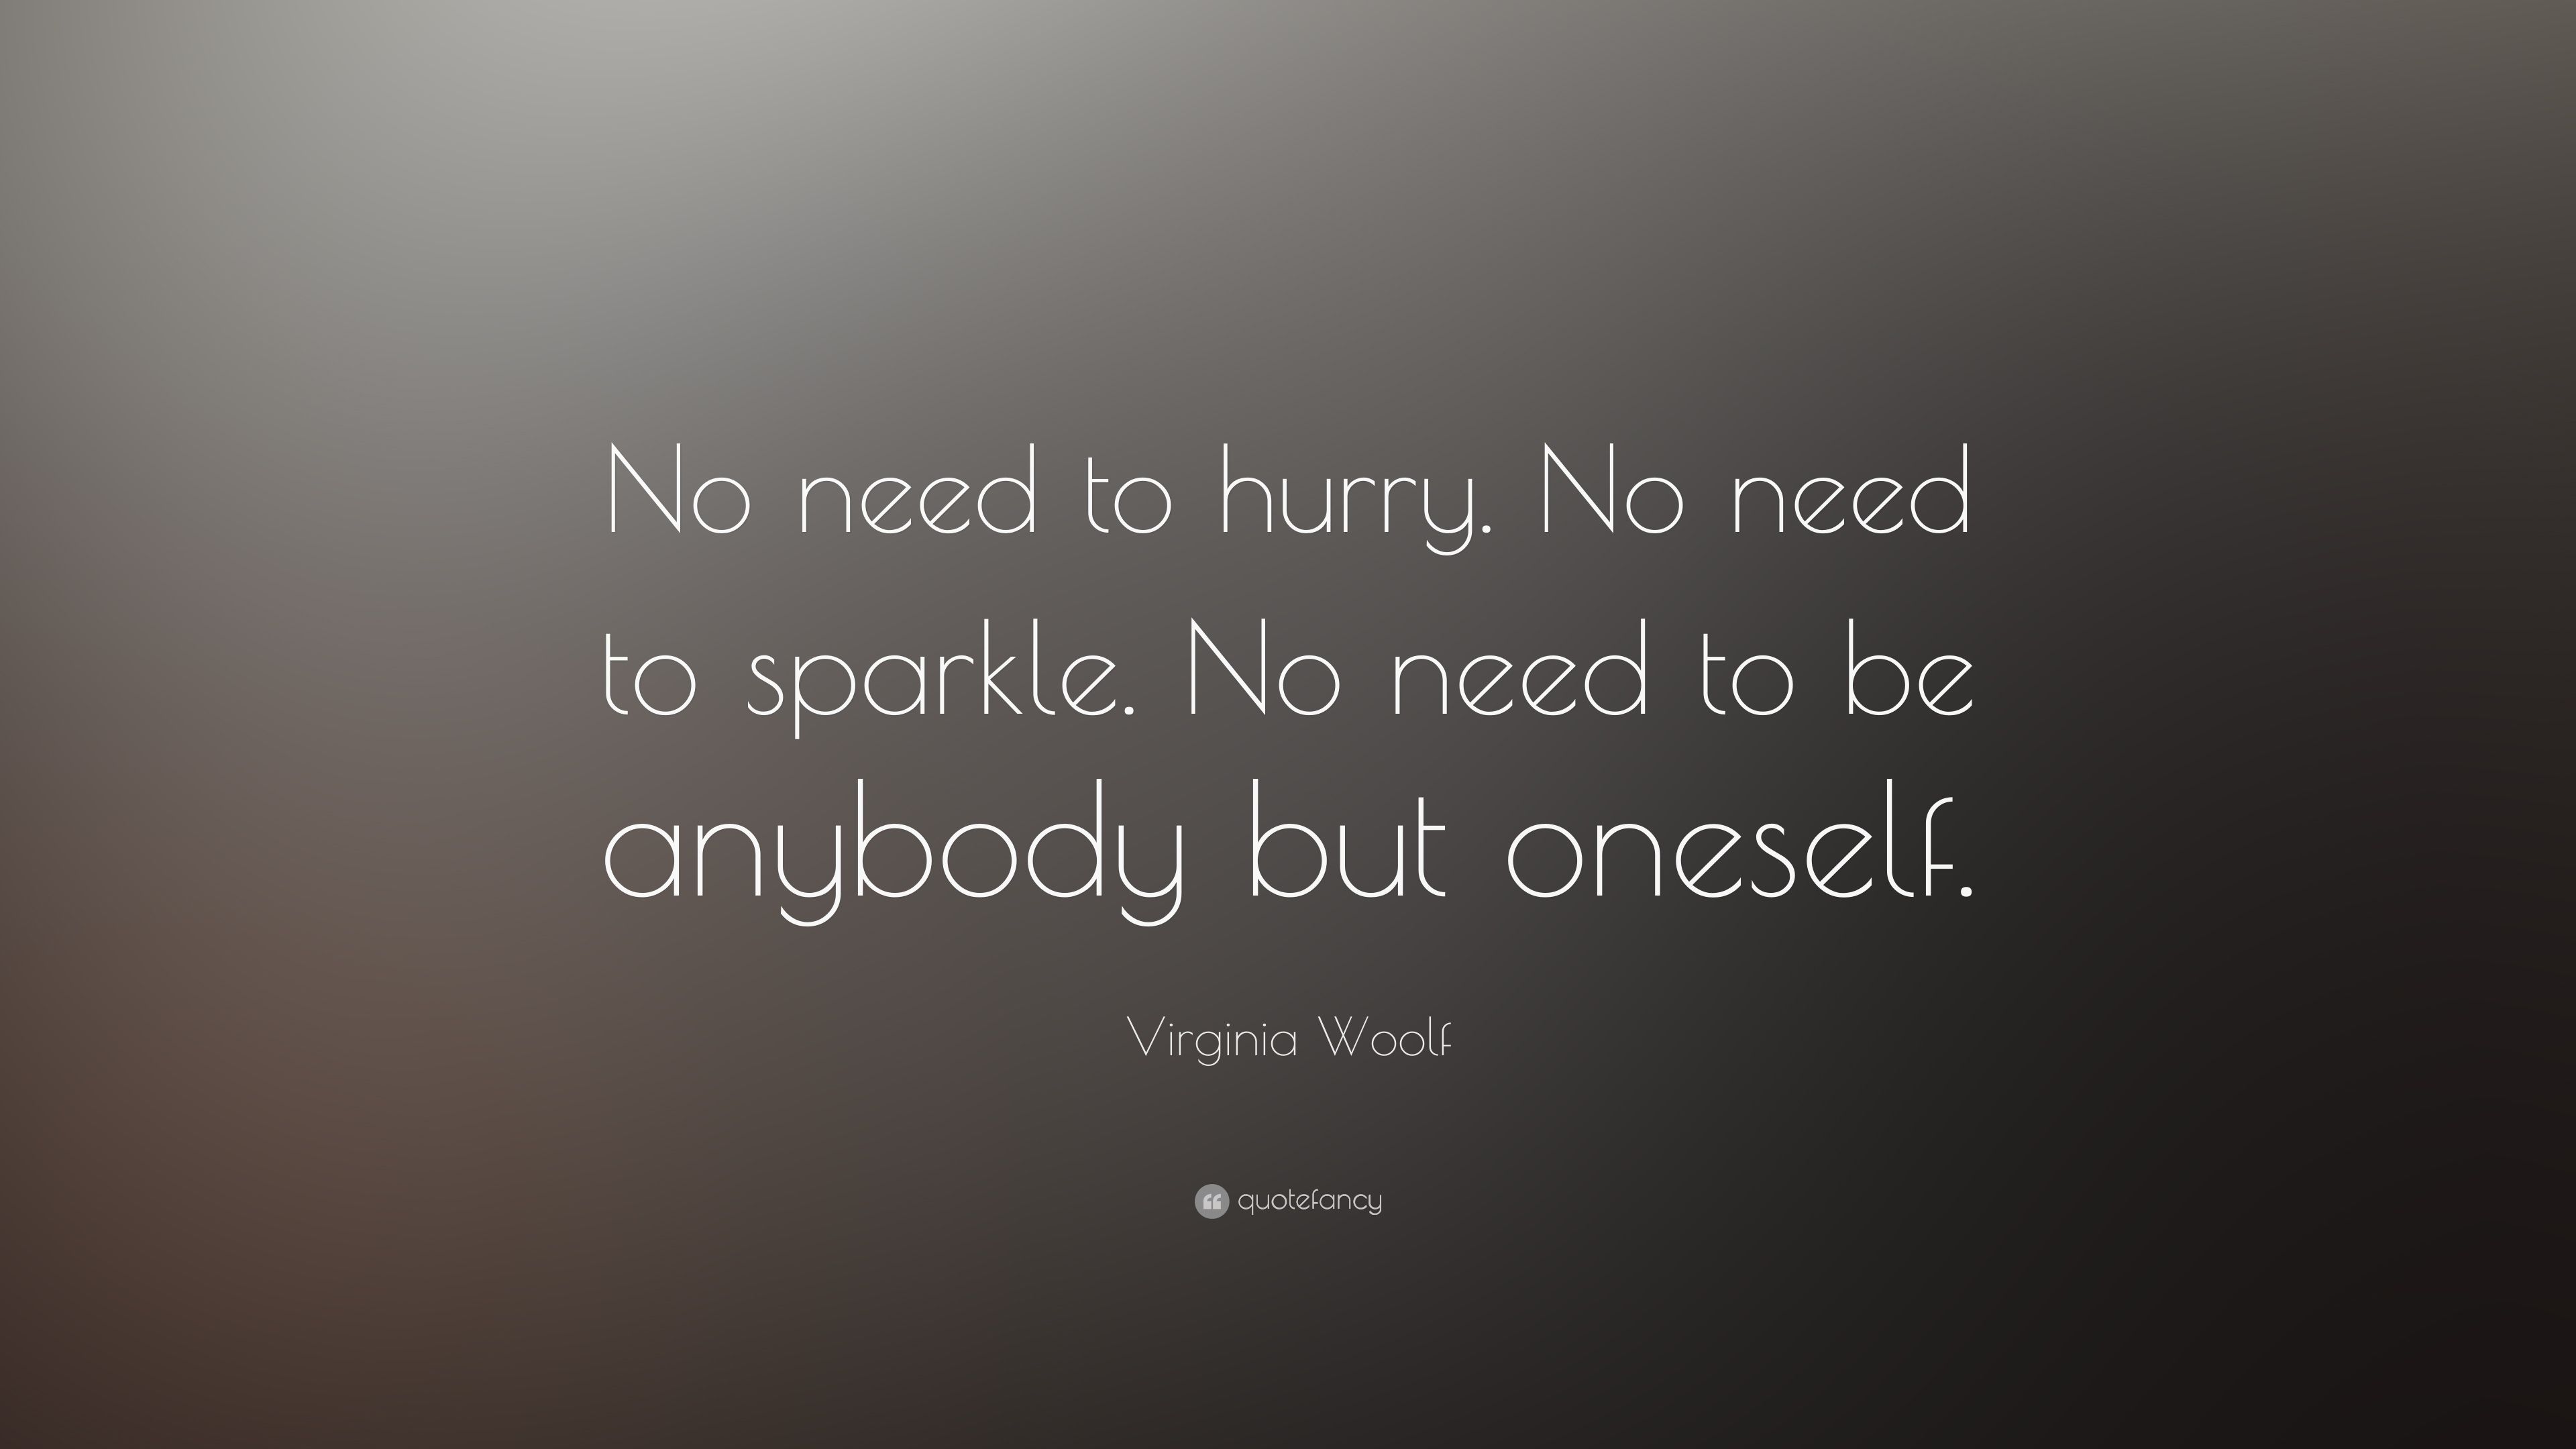 Virginia Woolf Quote: “No need to hurry. No need to sparkle. No